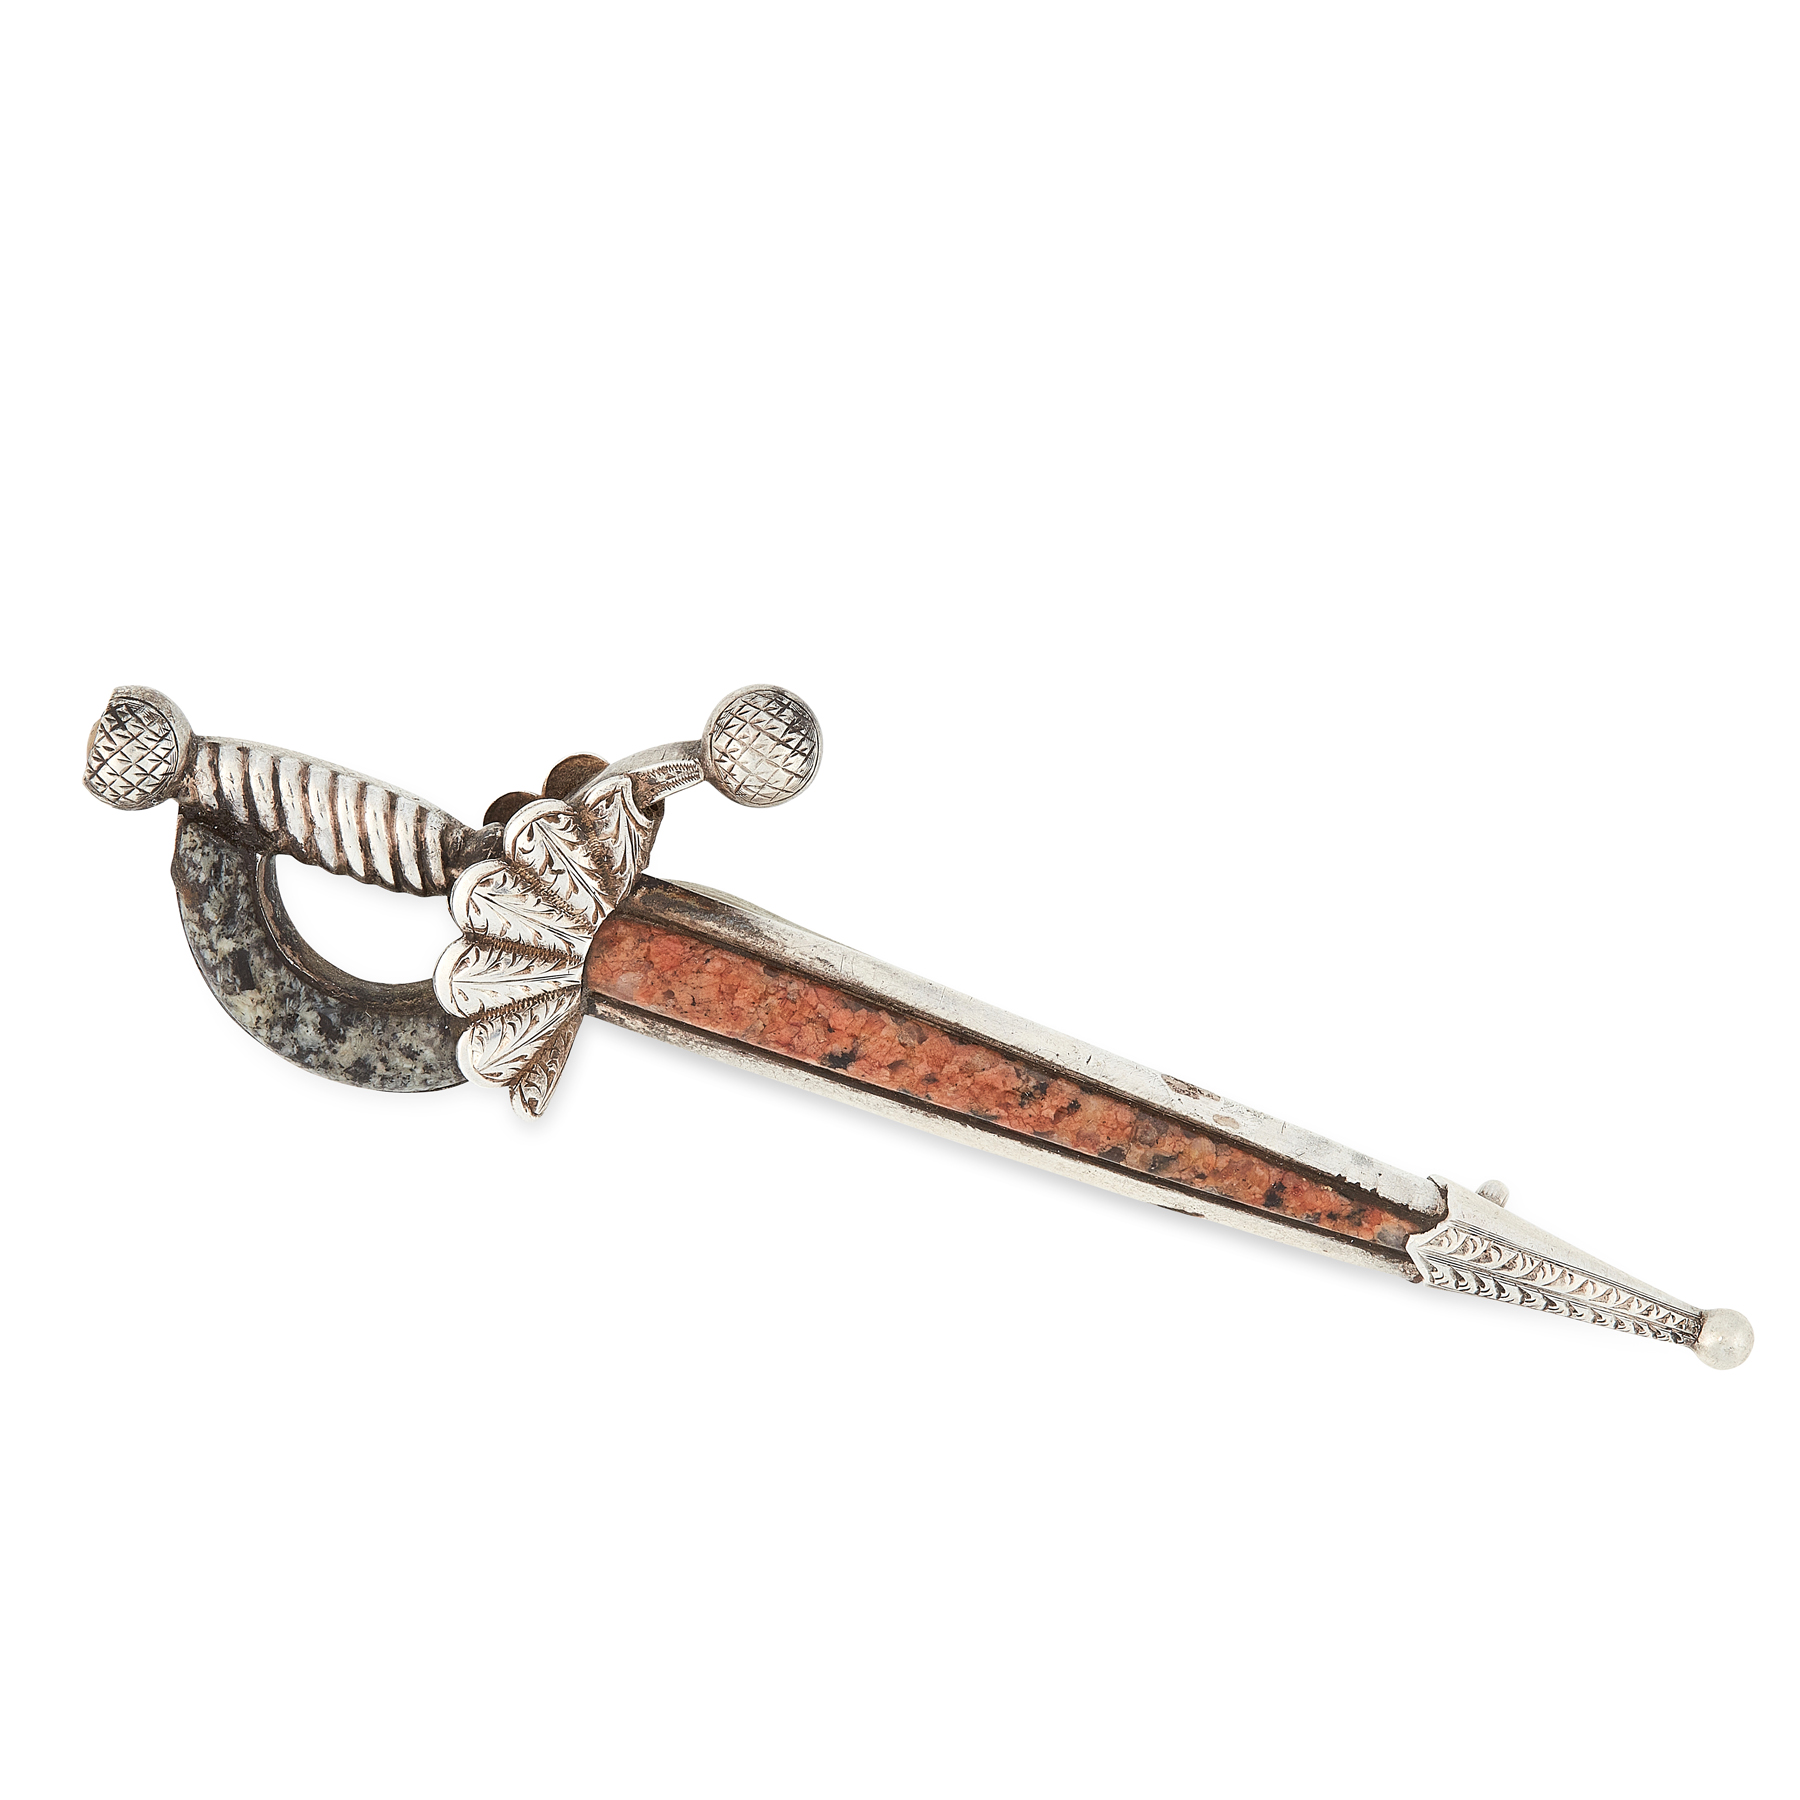 AN ANTIQUE SCOTTISH HARDSTONE KILT PIN BROOCH in silver, designed as a sword, the body and handle